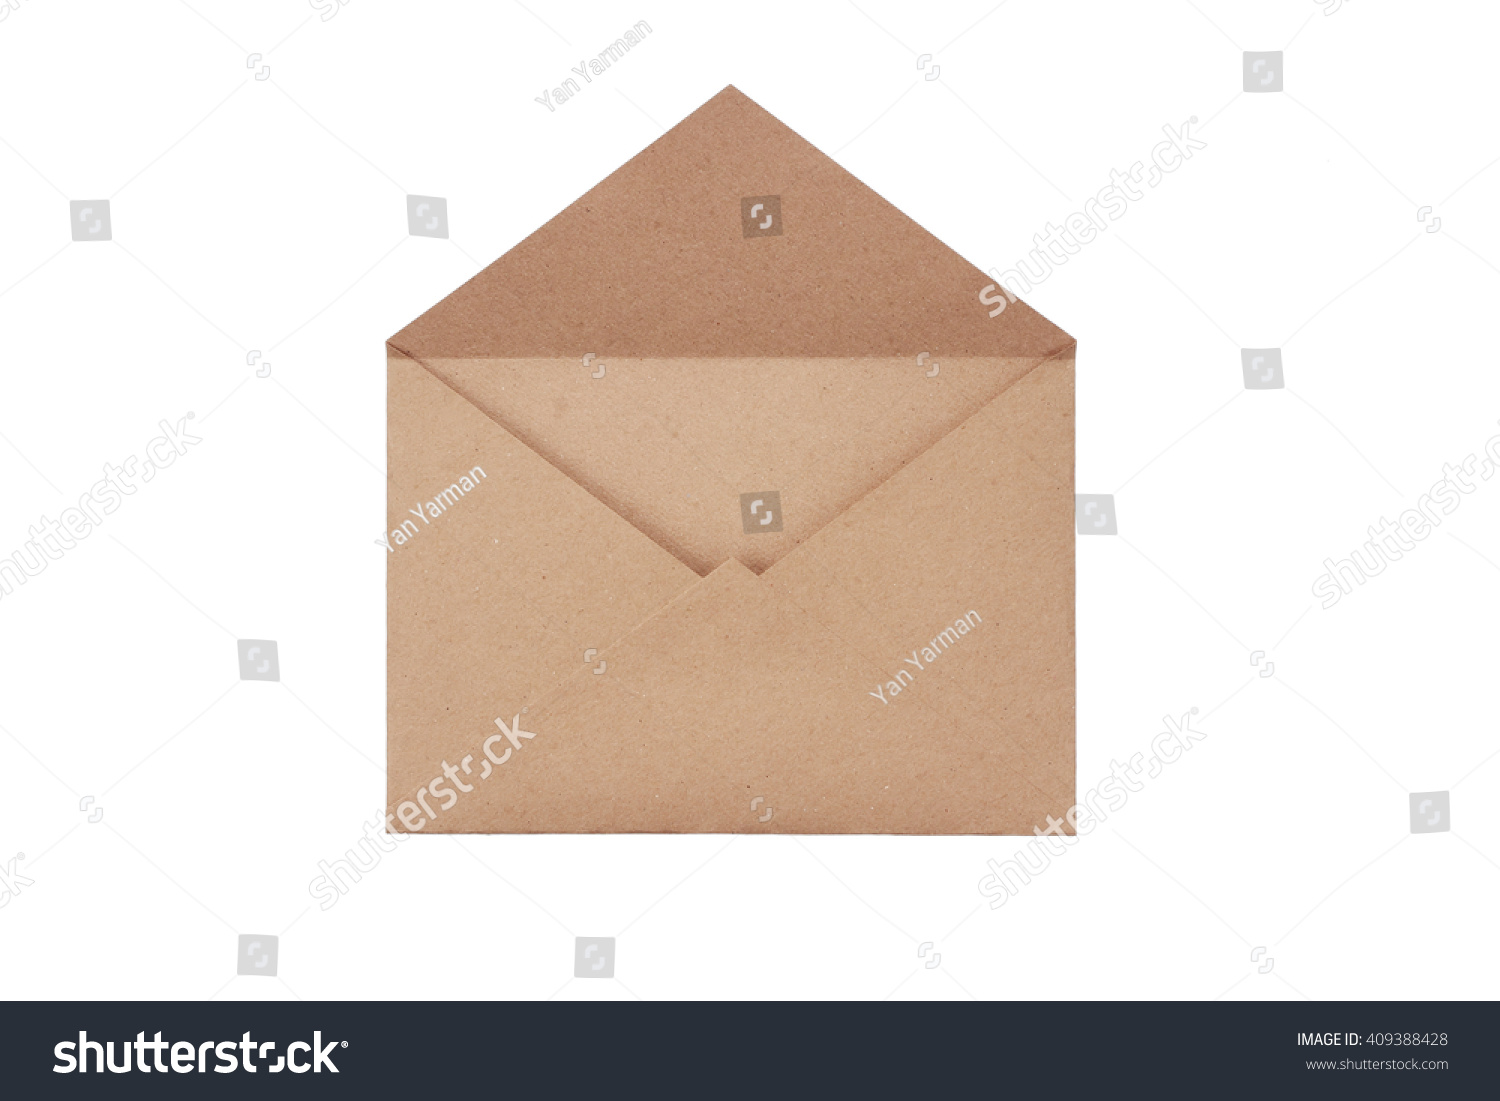 Brown craft envelope isolated on white background #409388428